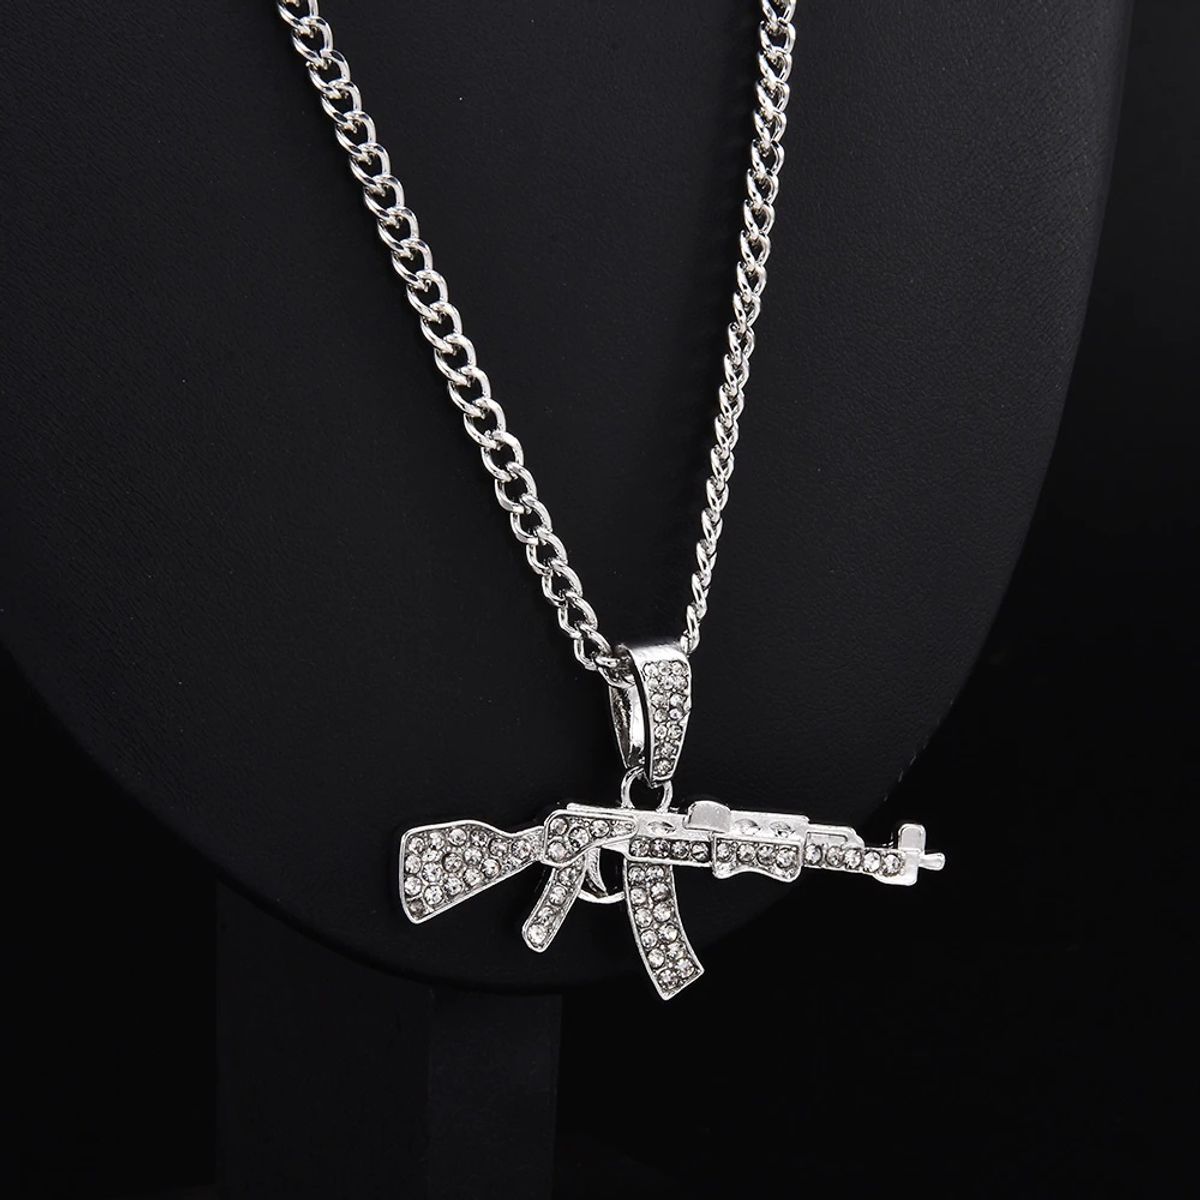 Mens AK47 Assault Rifle Gun Pendant Necklace with 18K Gold Plated Wheat  Chain : Amazon.ca: Clothing, Shoes & Accessories